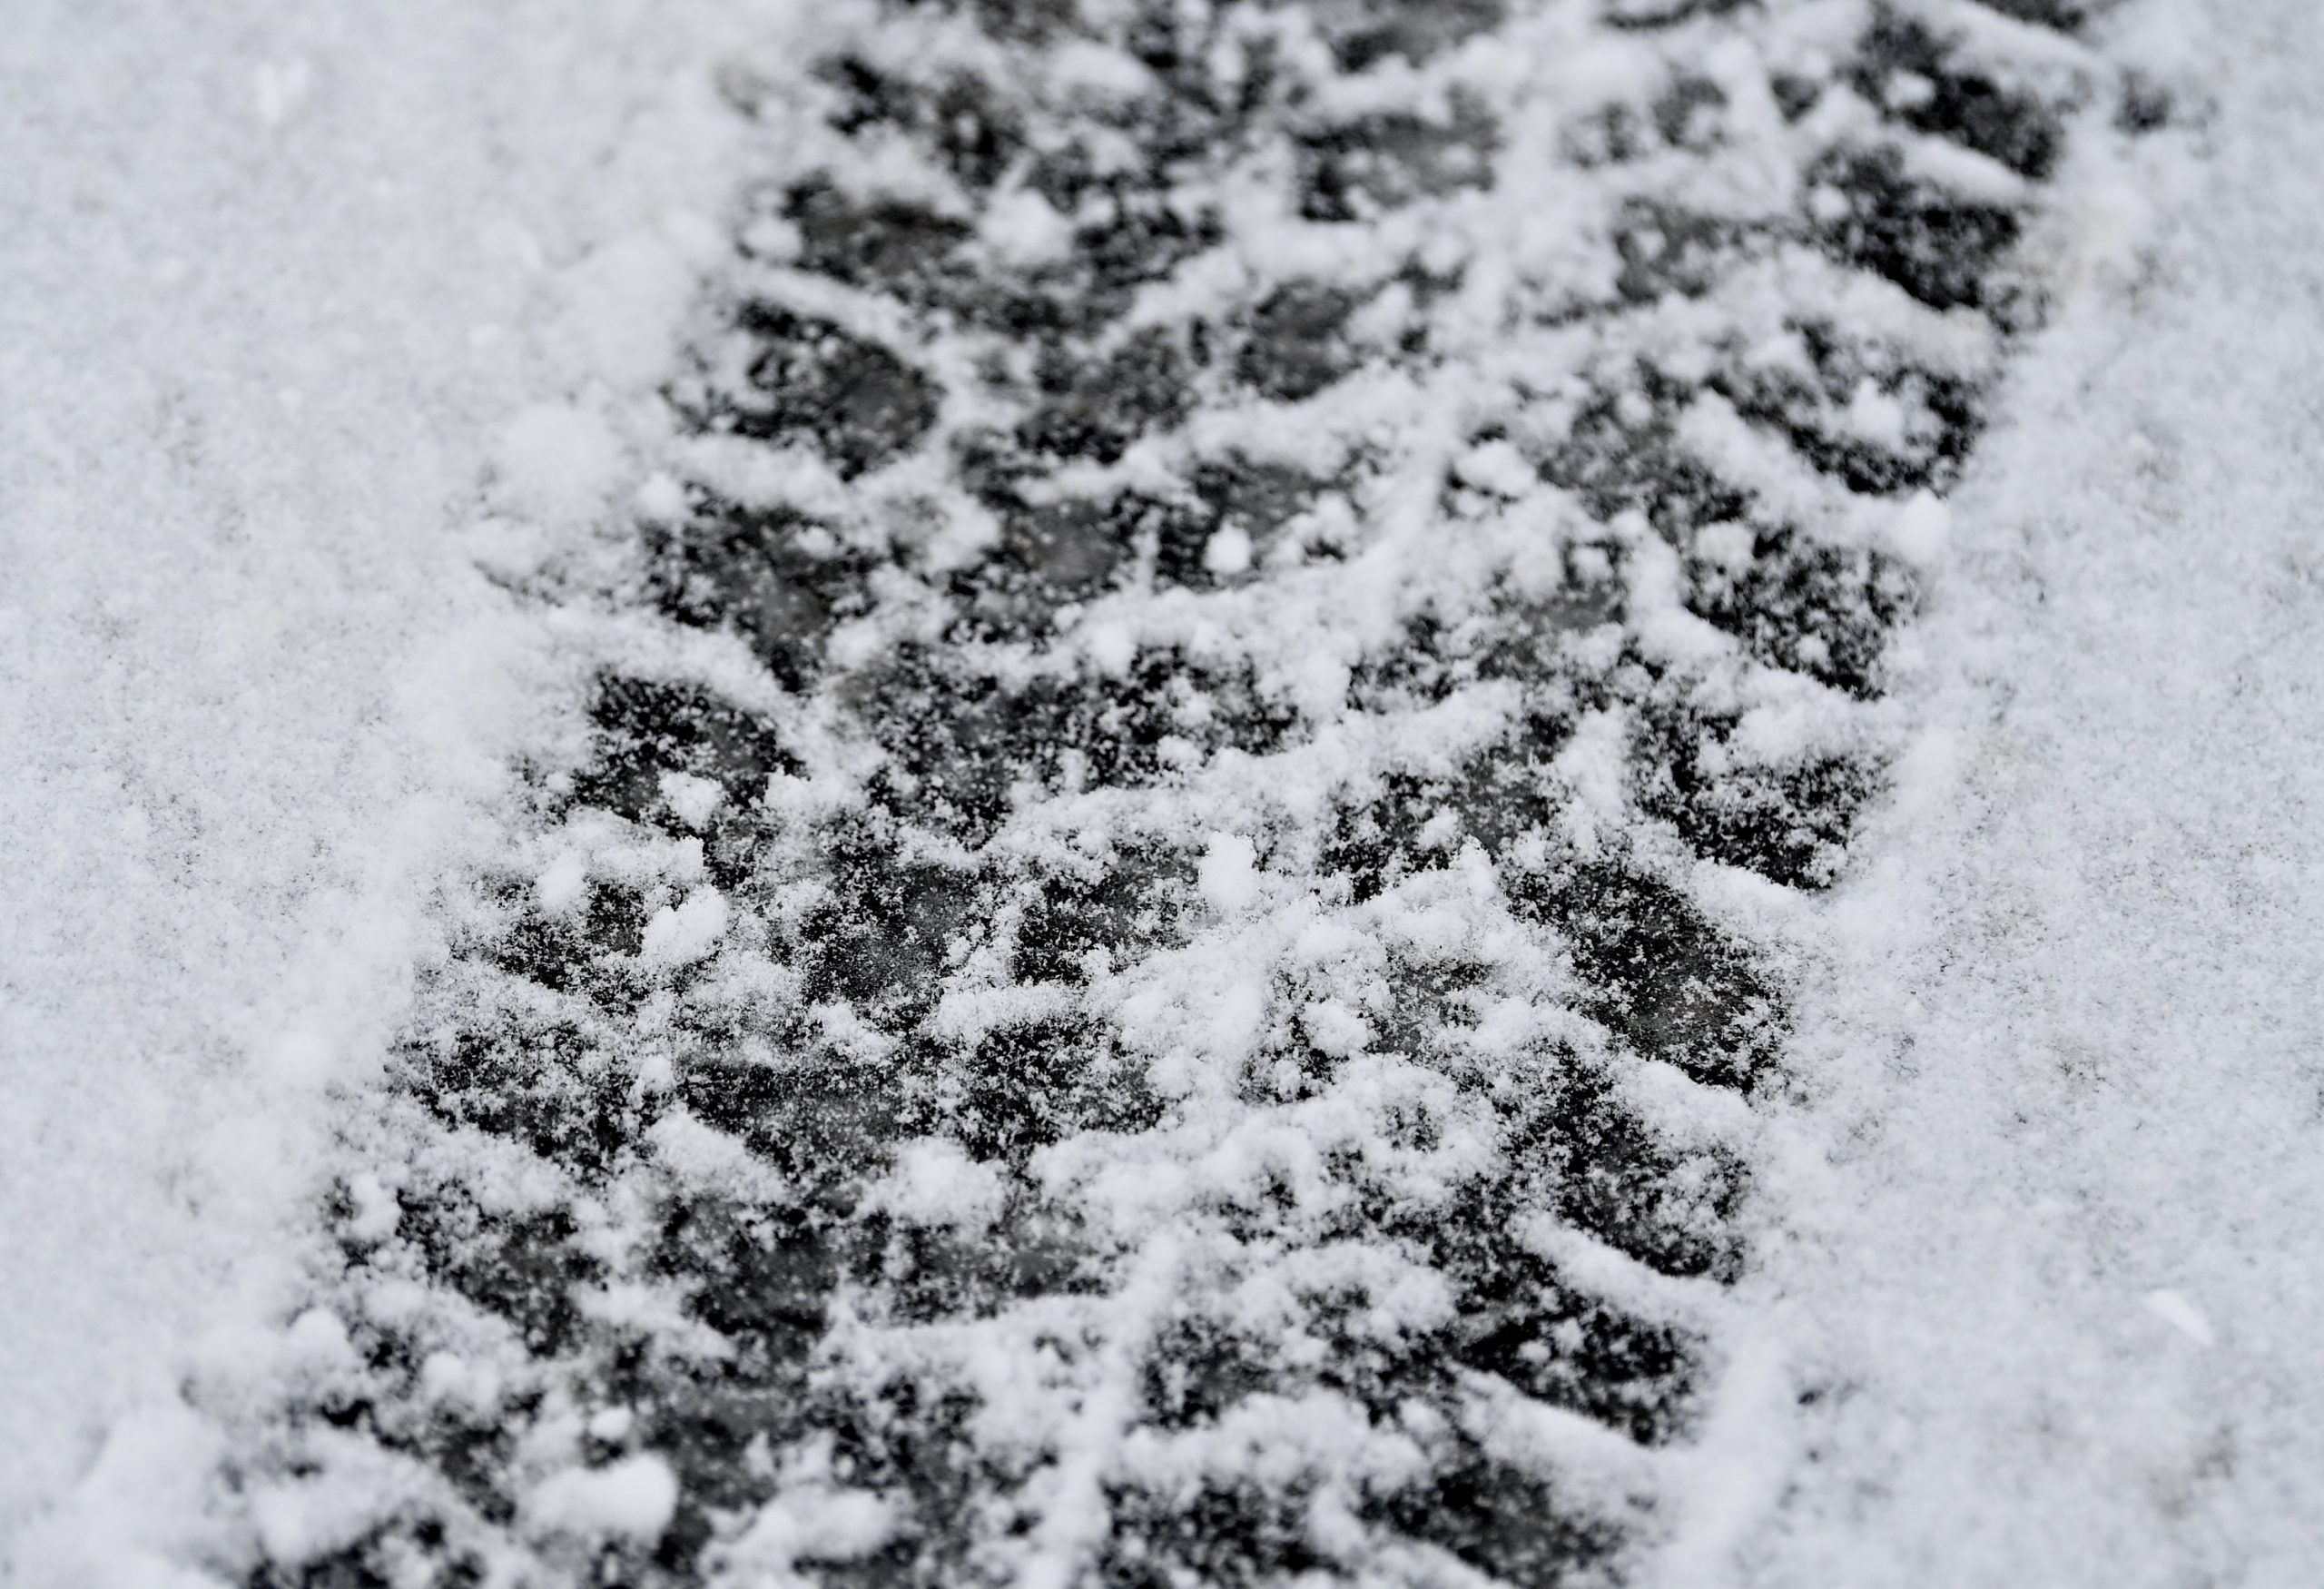 The tracks left by a car tire in the snow